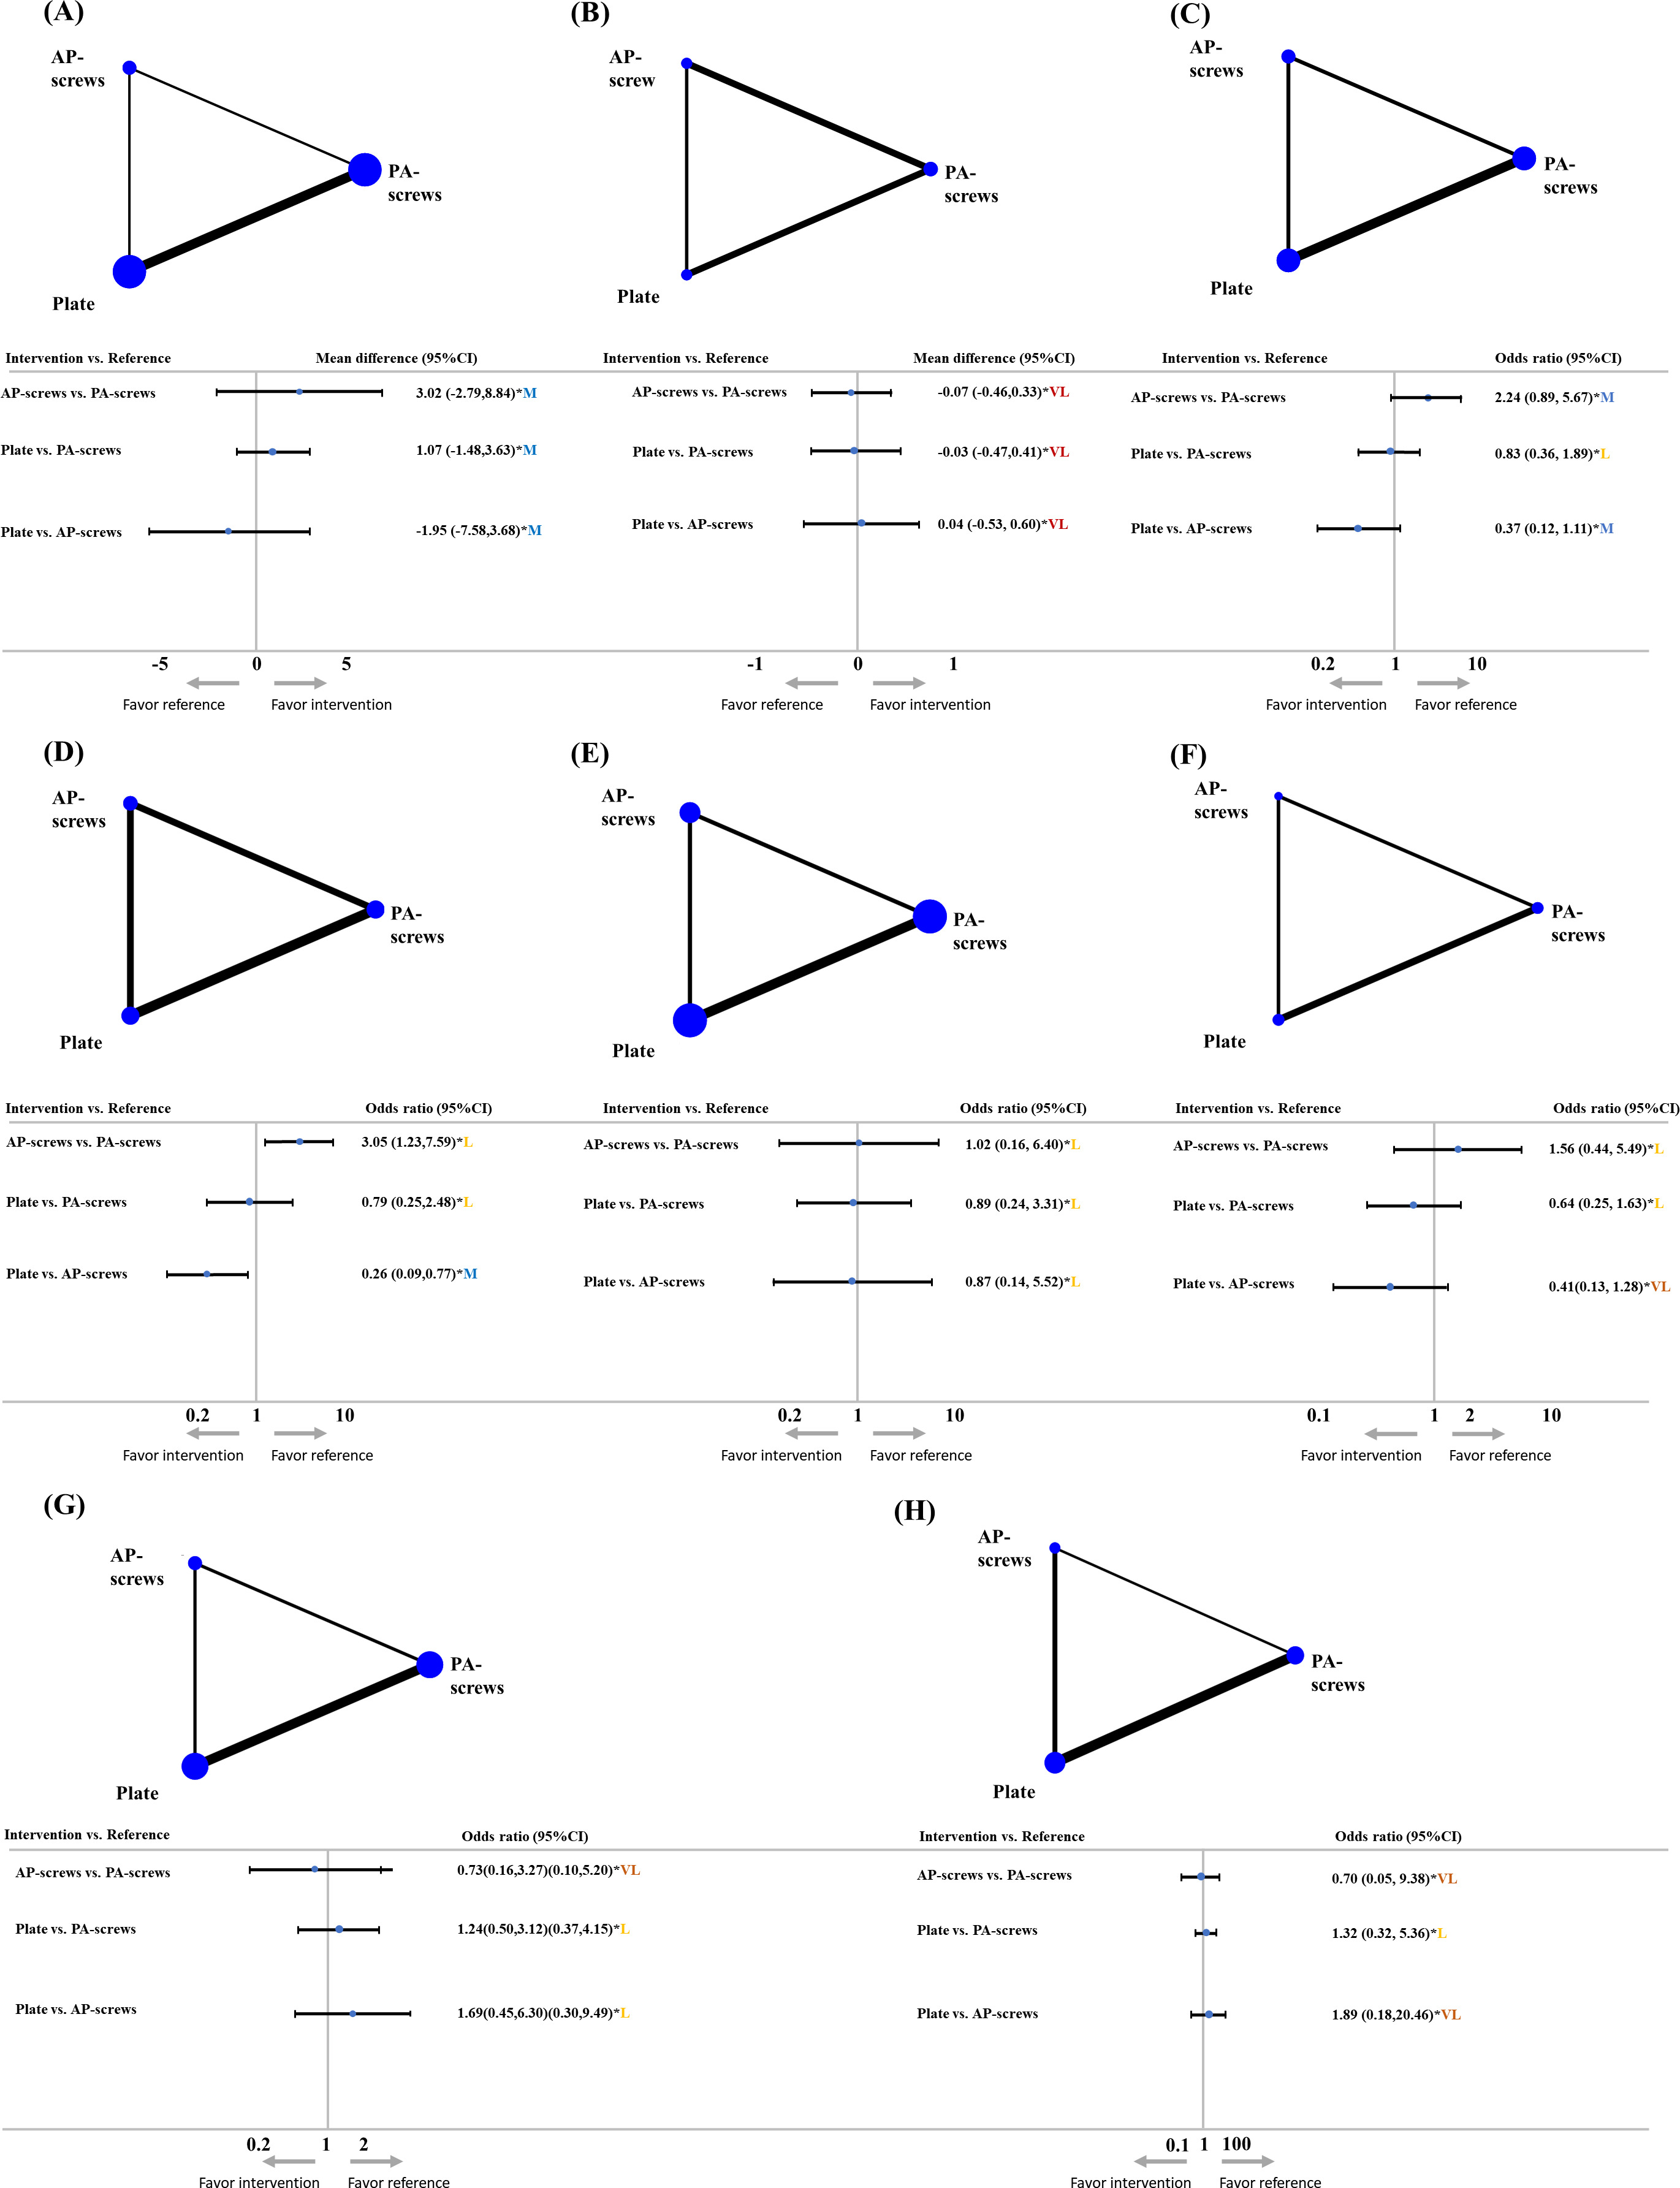 Fig. 2 
            Network plots and the network meta-analysis result with confidence rating for a) American Orthopaedic Foot and Ankle Score (AOFAS) changes, b) visual analogue scale (VAS) changes, c) the incidence of osteoarthritis grade progression, d) the incidence of step-off ≥ 2 mm, e) the incidence of nonunions, f) the incidence of loss of dorsiflexion ≥ 5°, g) the incidence of infections, and h) the incidence of peroneal nerve injuries. *p < 0.05. A-P, anteroposterior; CI, confidence interval; L, low confidence rating; M, moderate confidence rating; P-A, posteroanterior; VL, very low confidence rating.
          